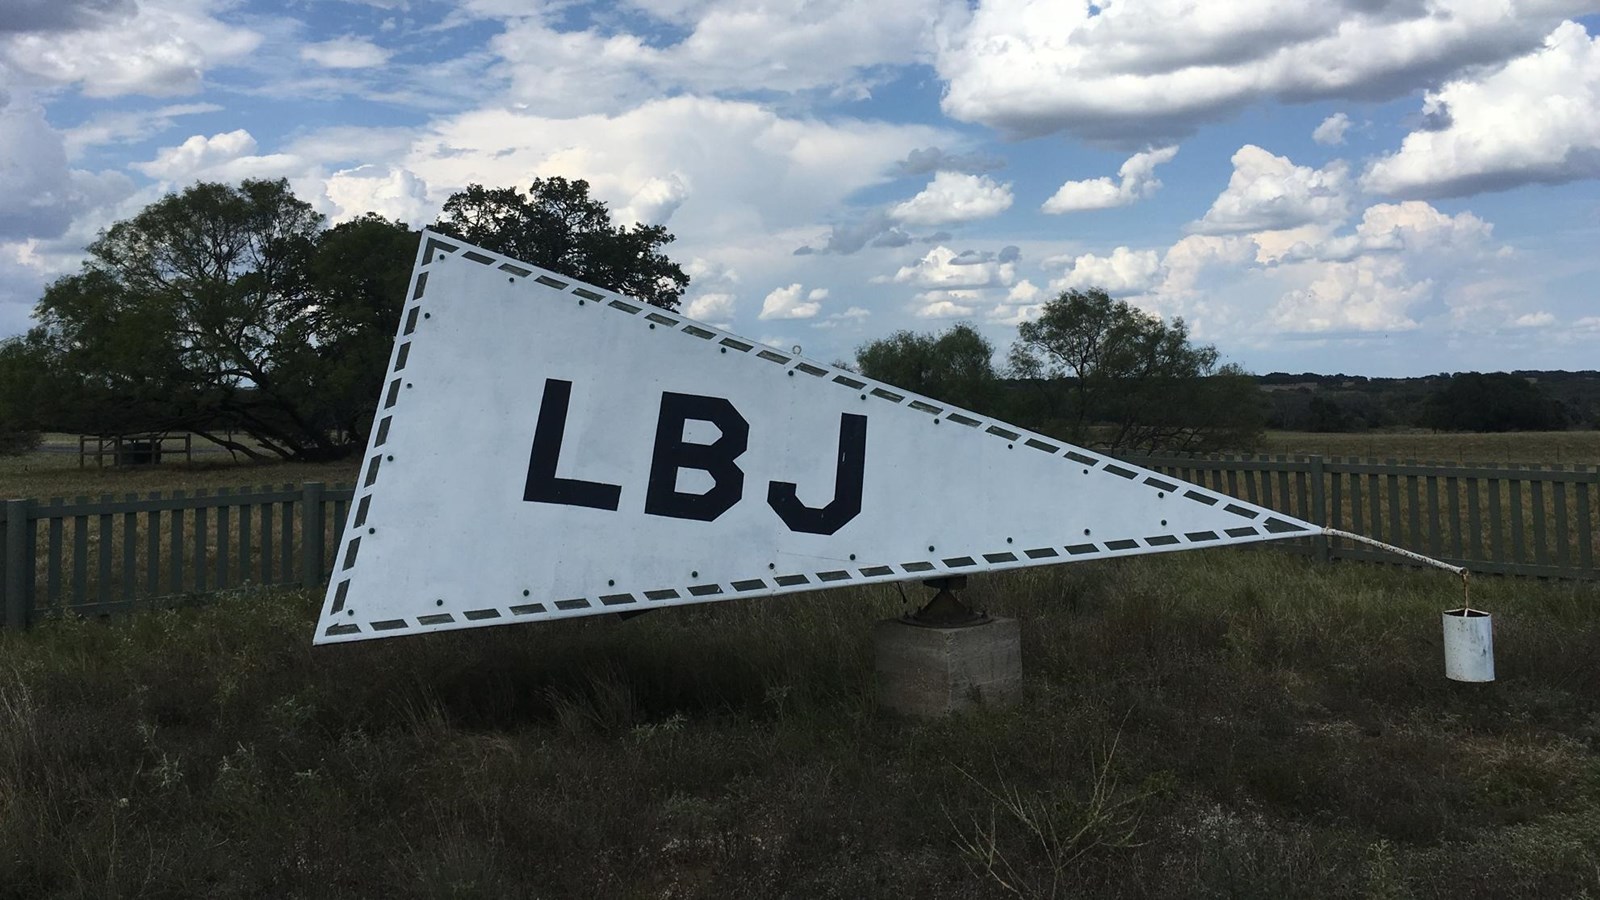 Under white clouds, a gray triangular pyramid sits with dark letters L-B-J on its side.